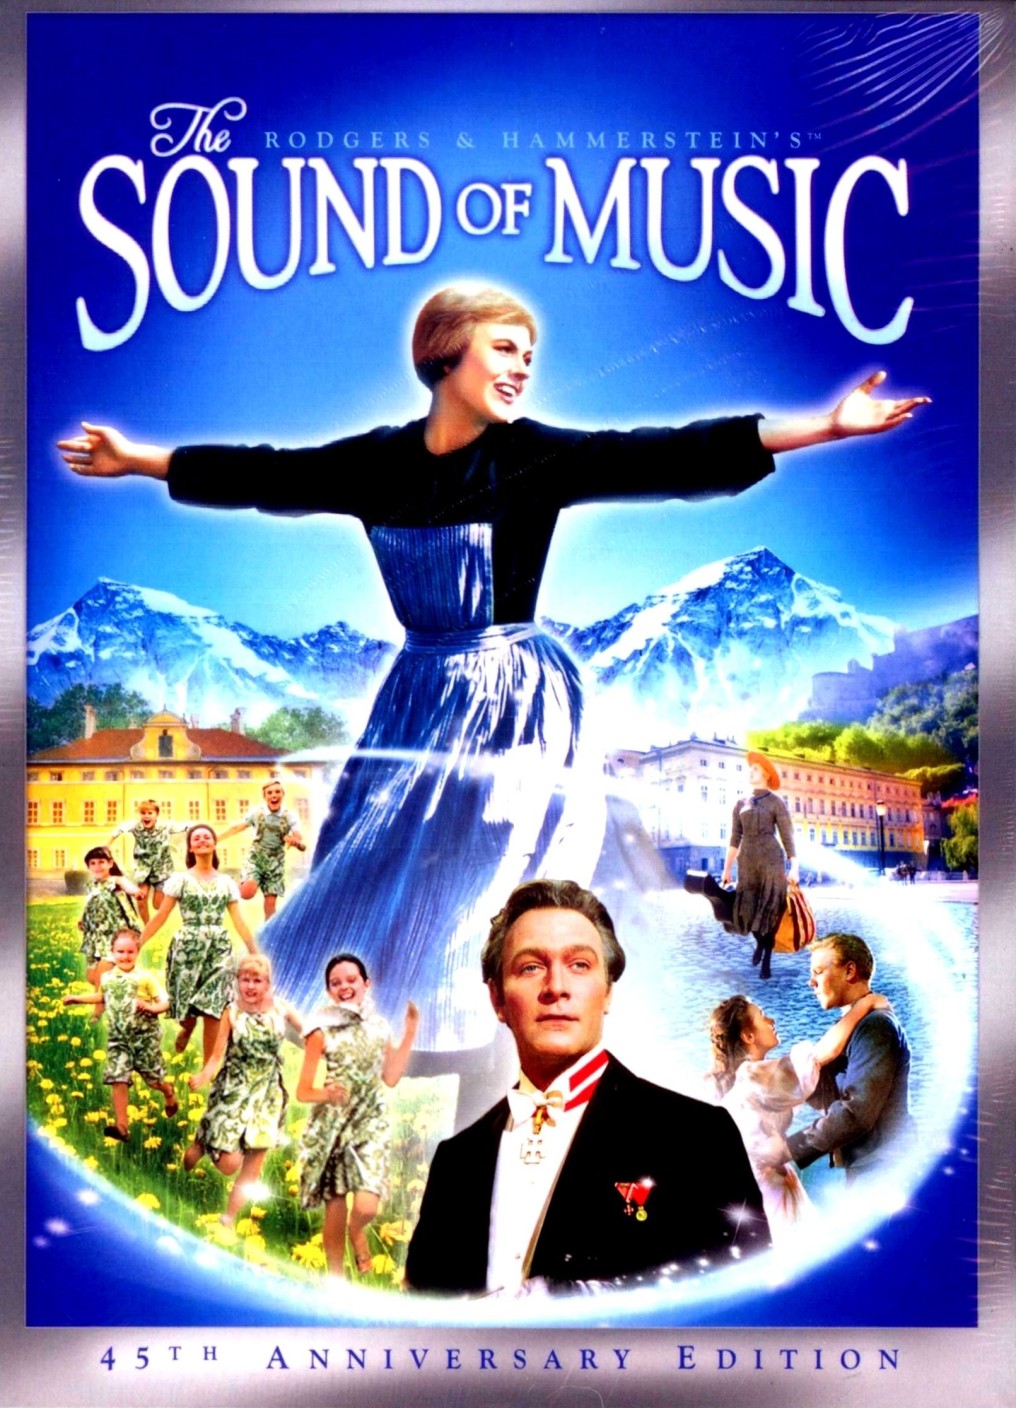 The Sound Of Music (45th Anniversary Edition) Price in India - Buy The